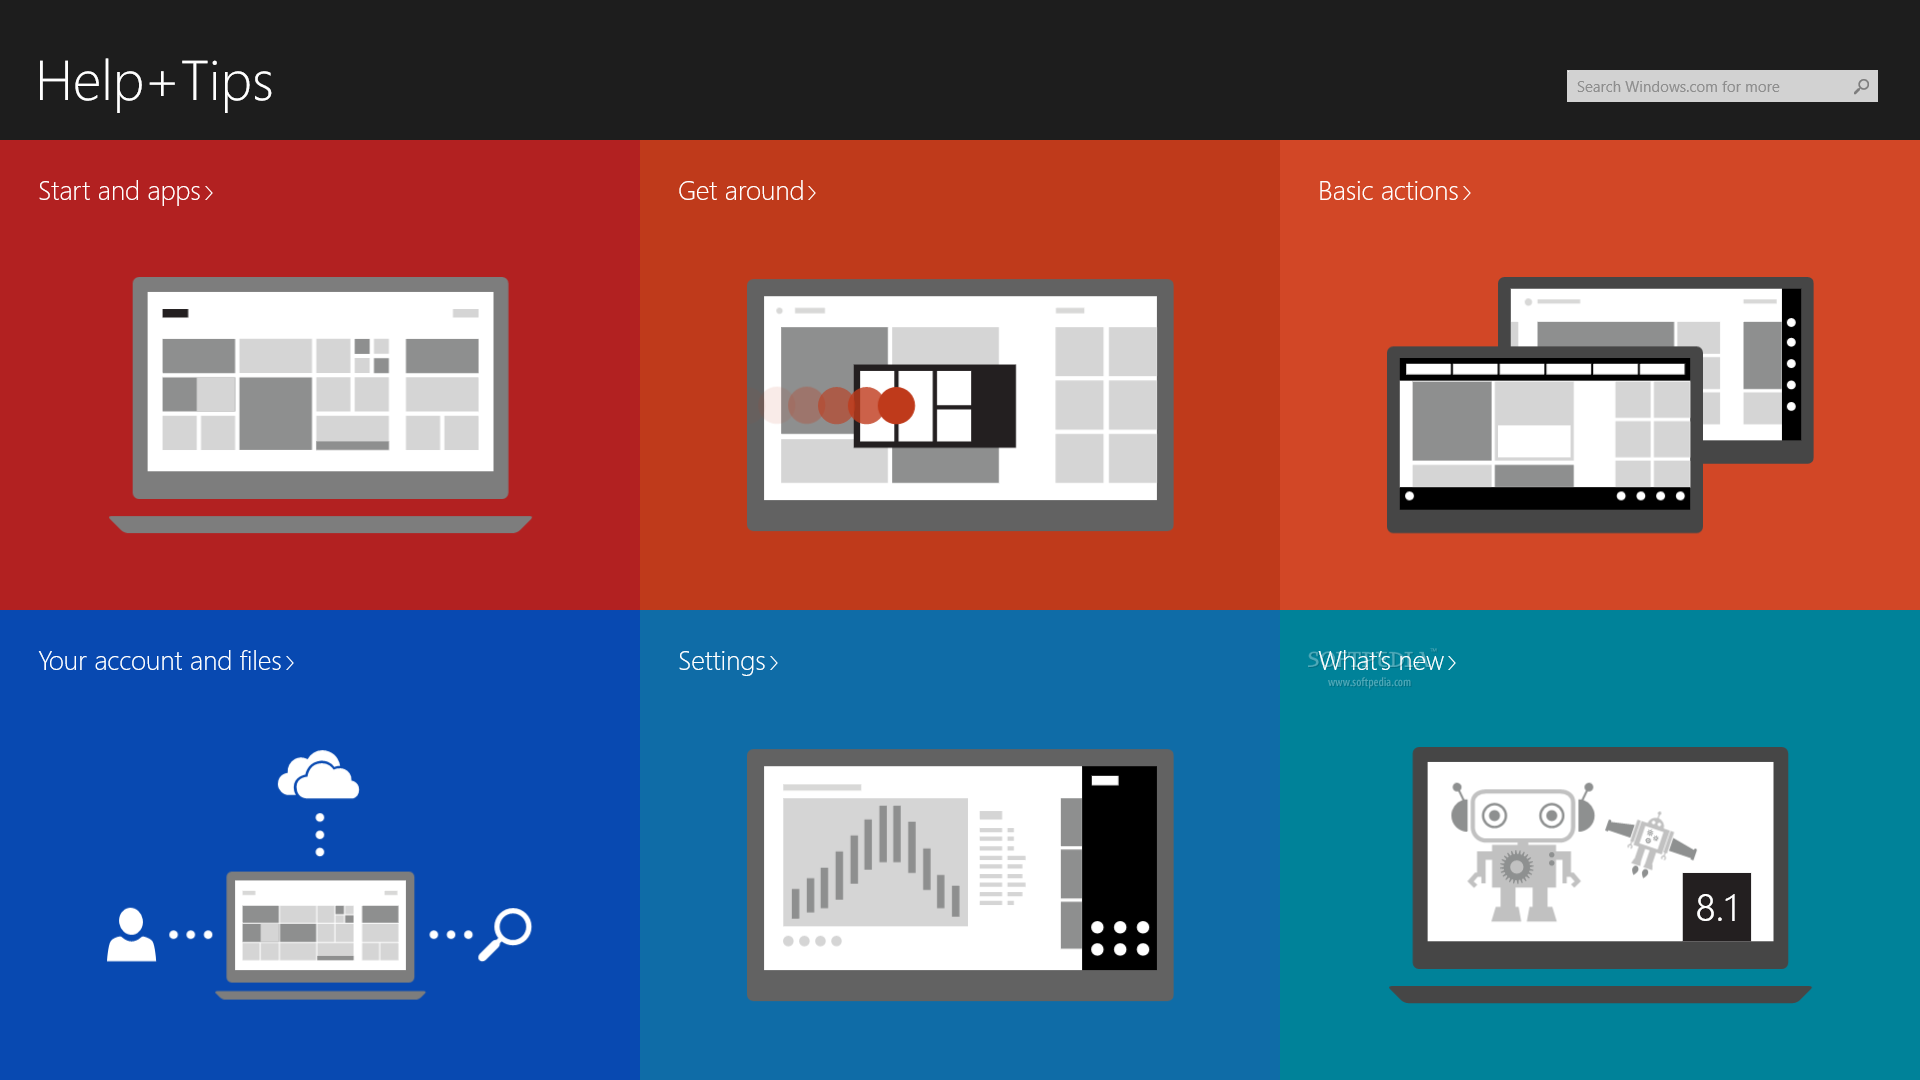 Top 46 Others Apps Like Help+Tips for Windows 8.1 - Best Alternatives